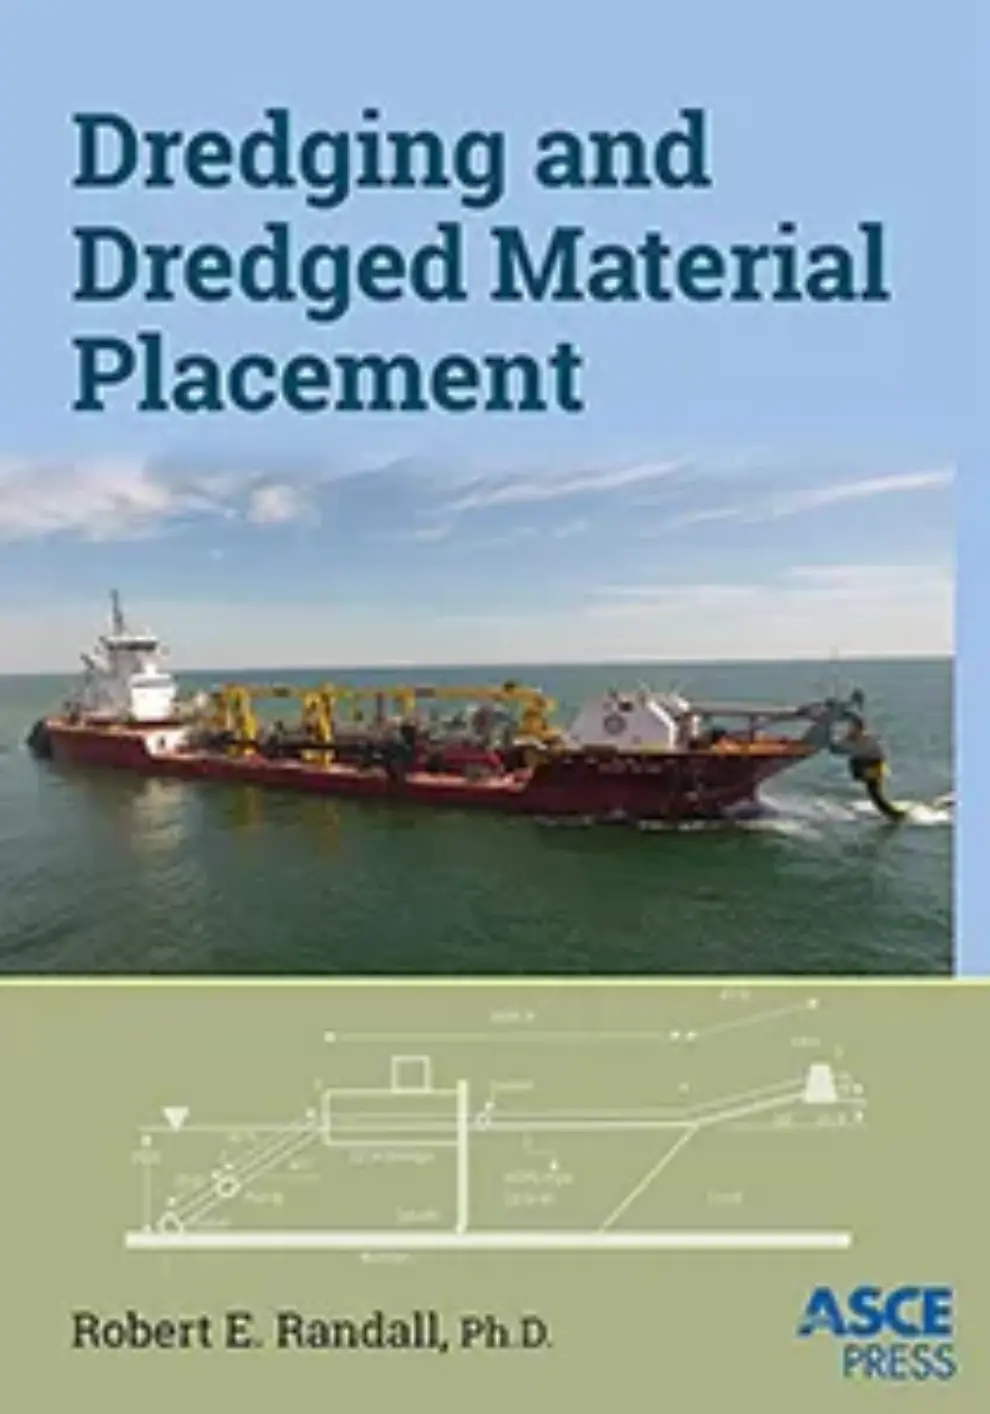 <a><strong>New ASCE Press Book Provides Comprehensive Overview of Dredging</strong></a>